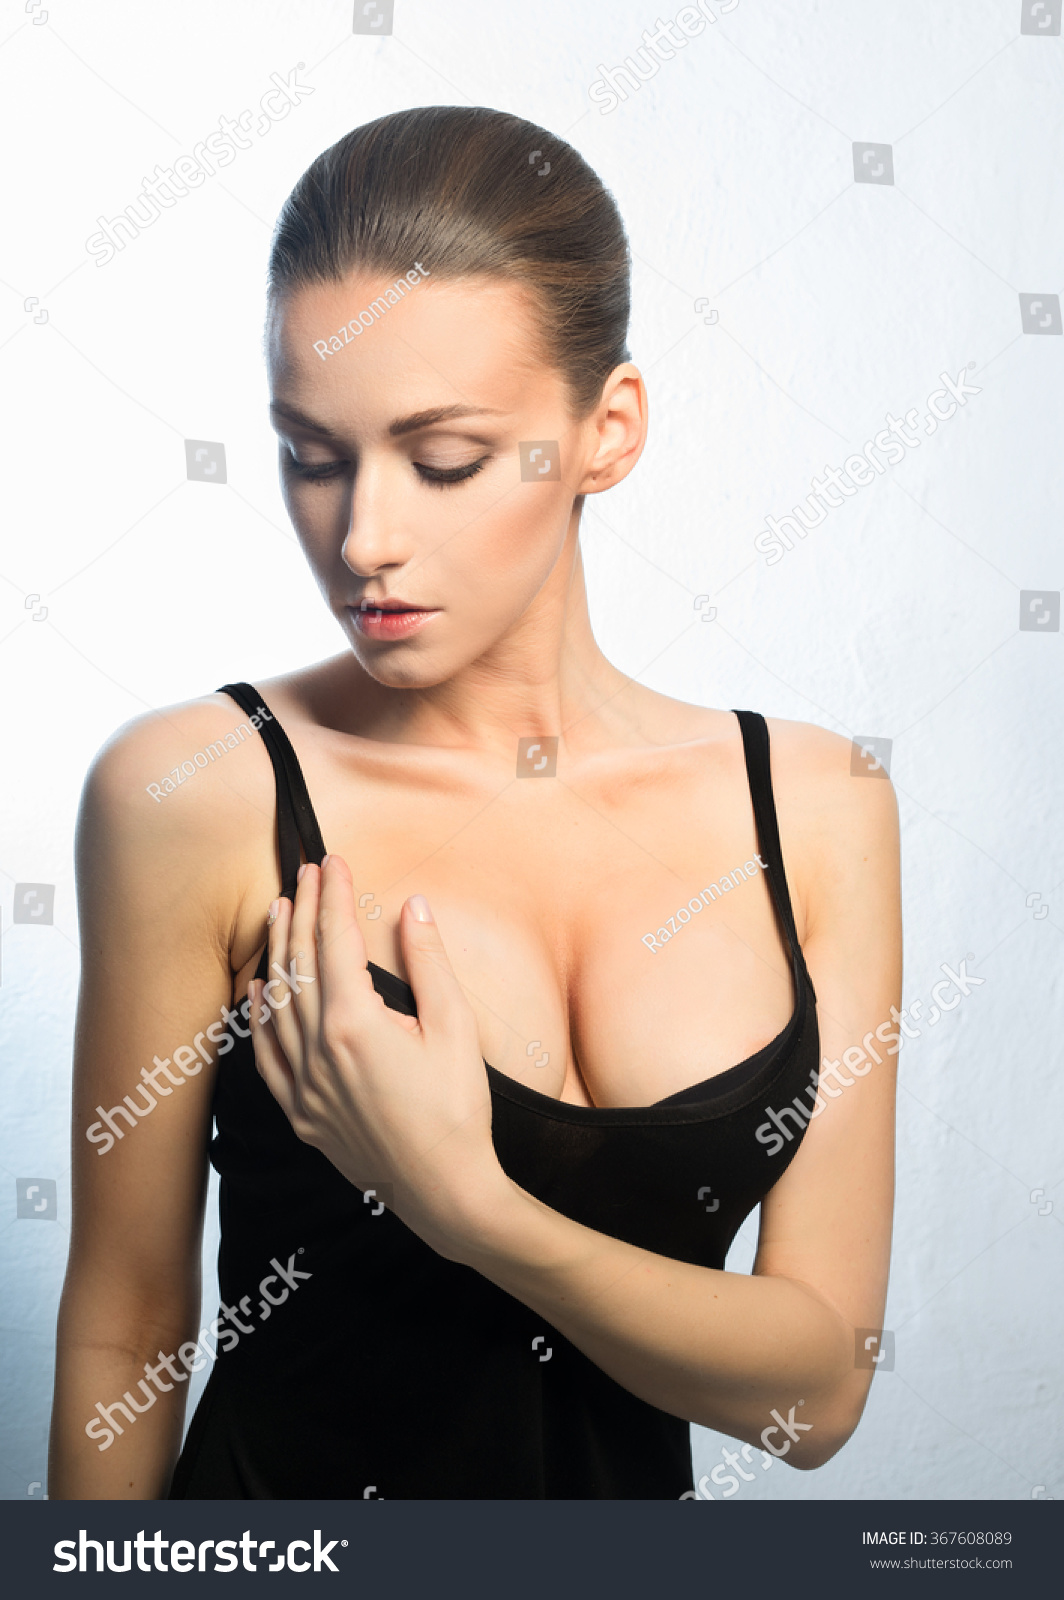 Breasts nice women with 100 women